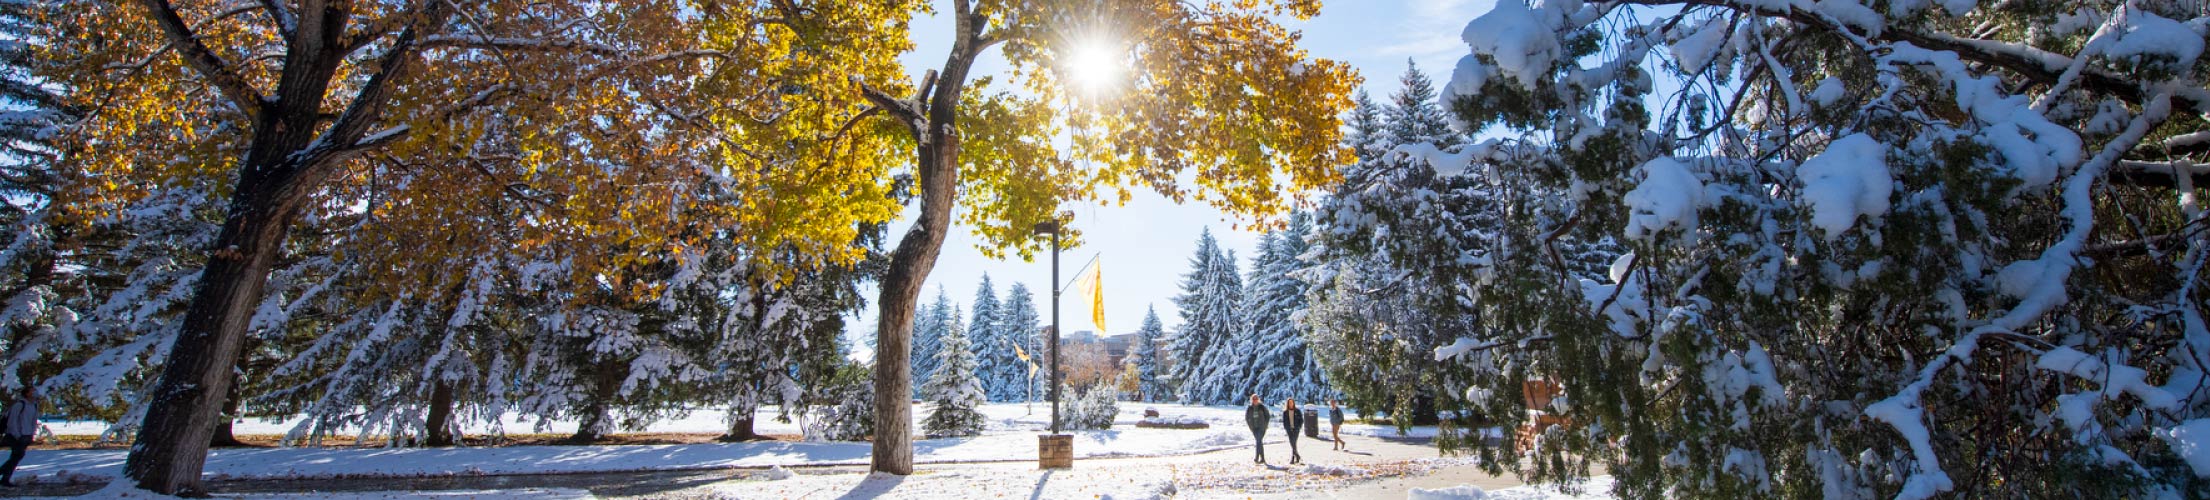 Students walk to class on a snowy fall day.